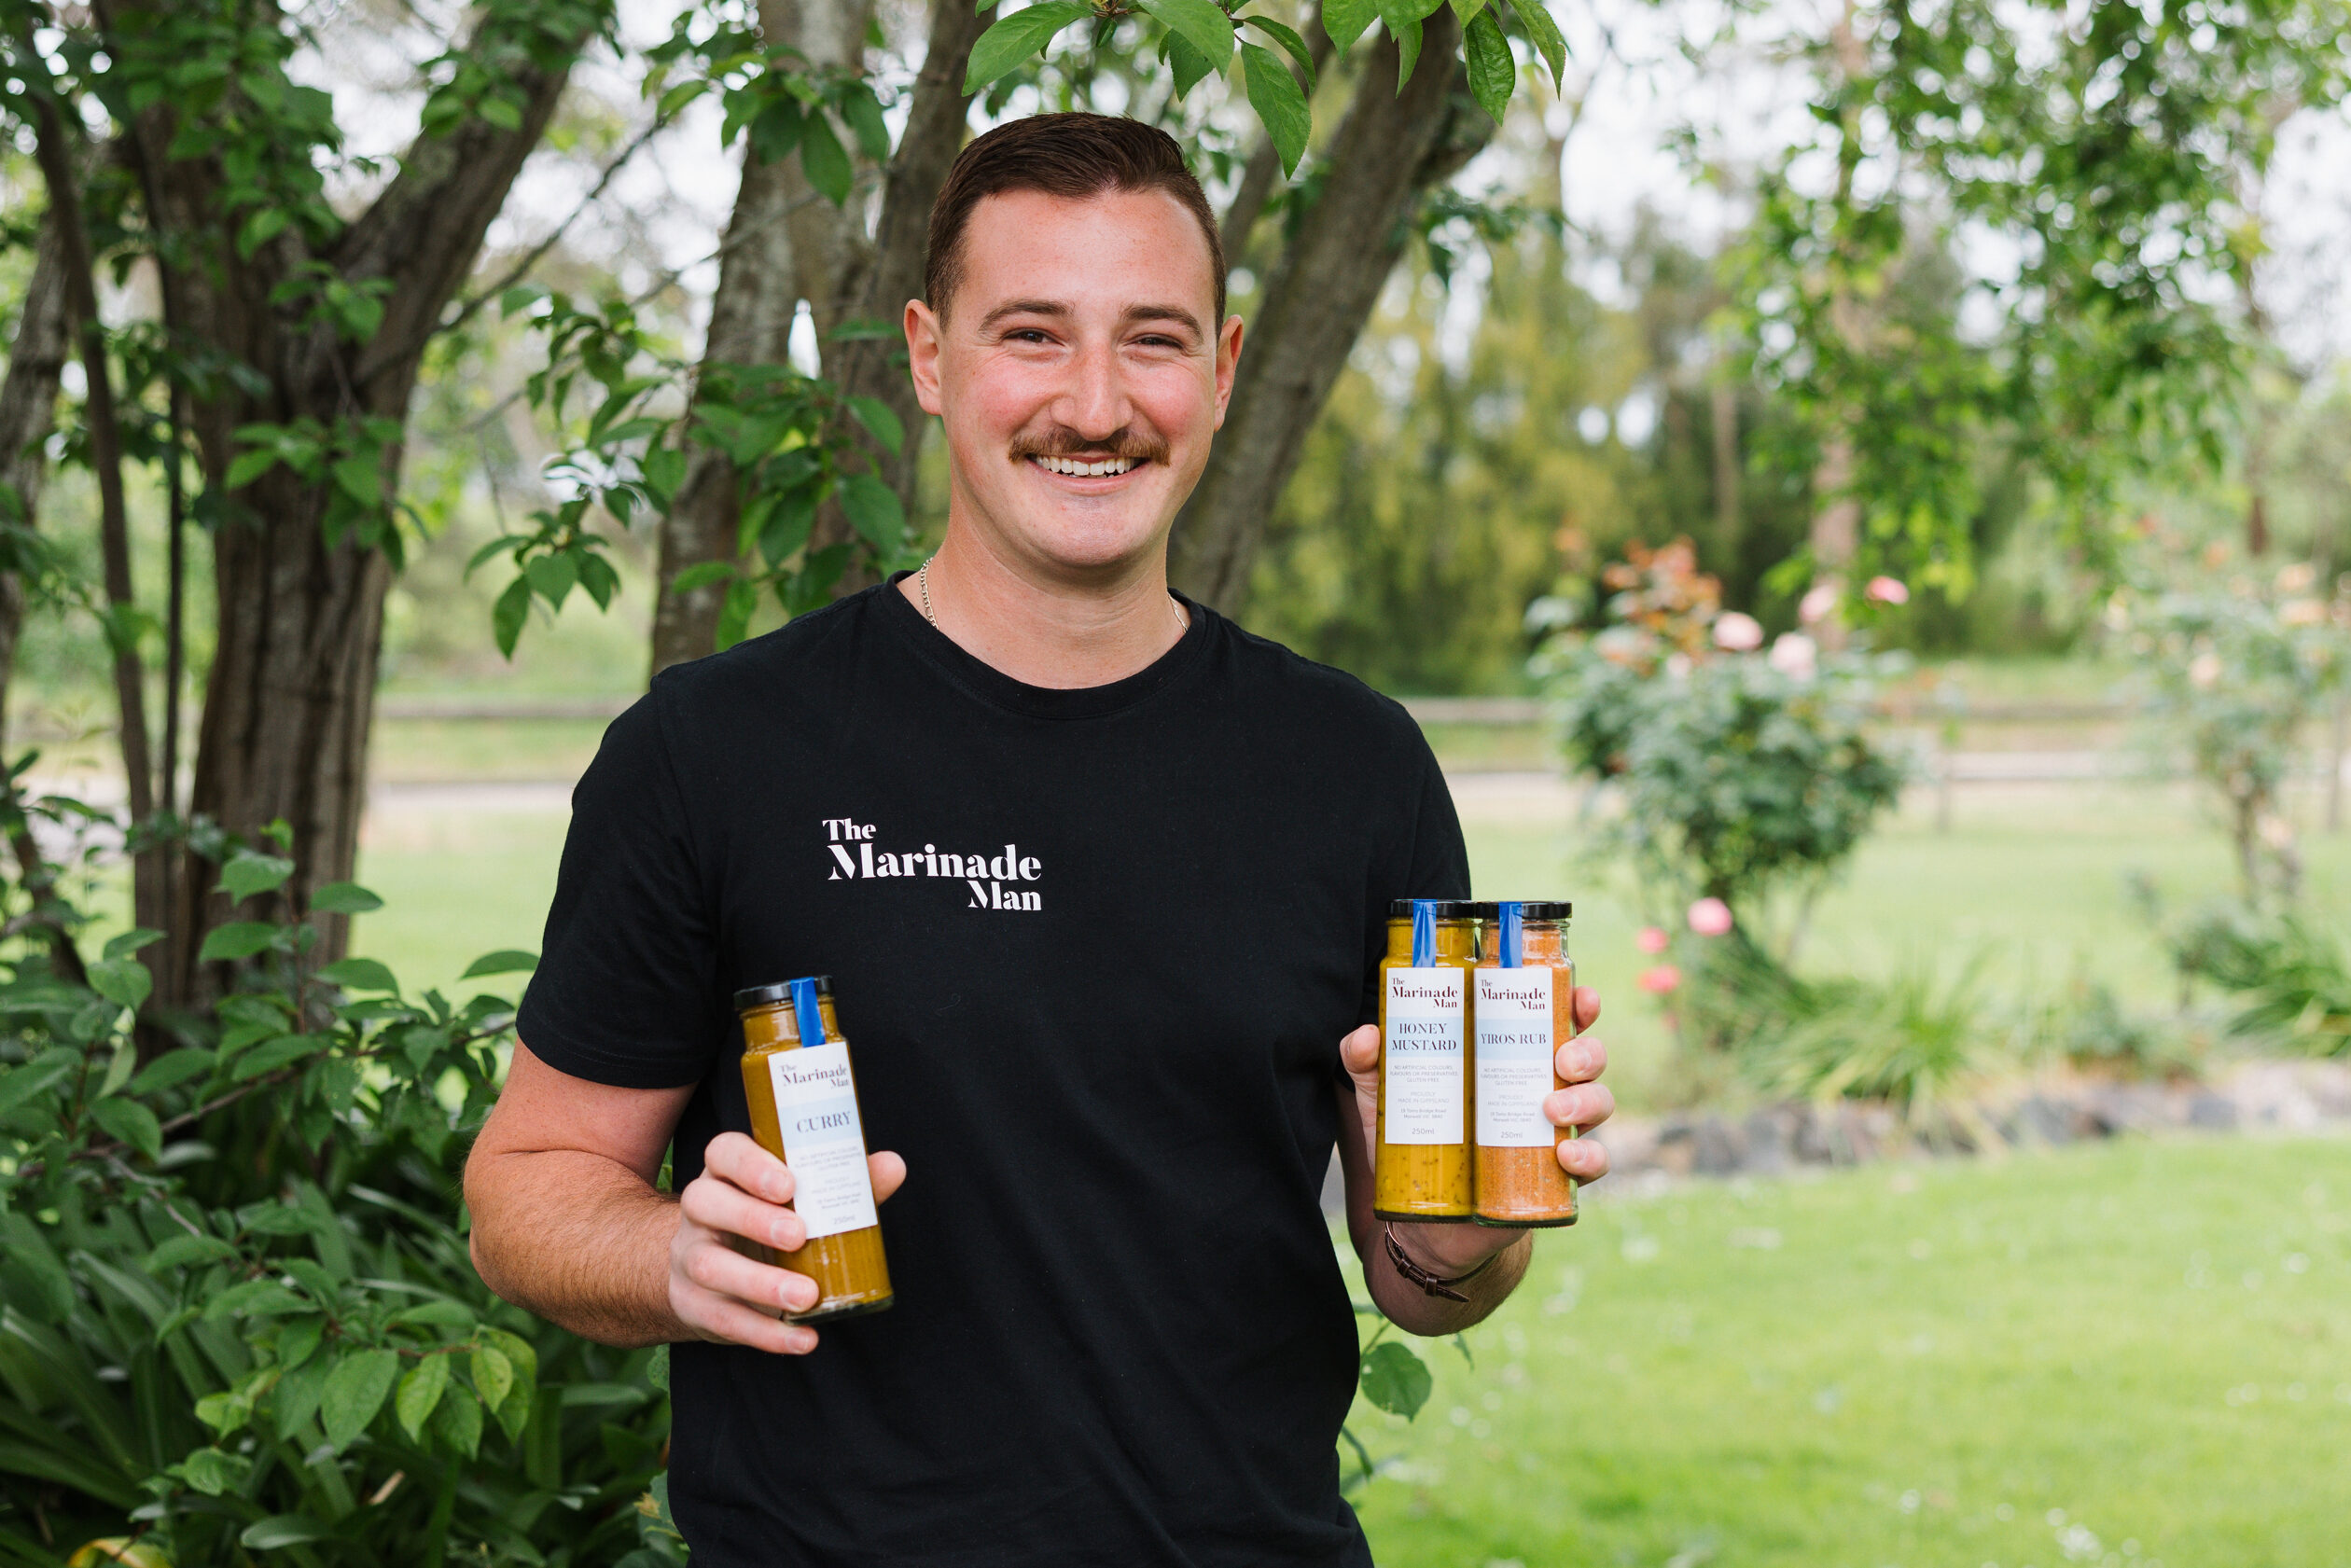 Experimenting with flavours at local chicken shop helped Chris follow his passion